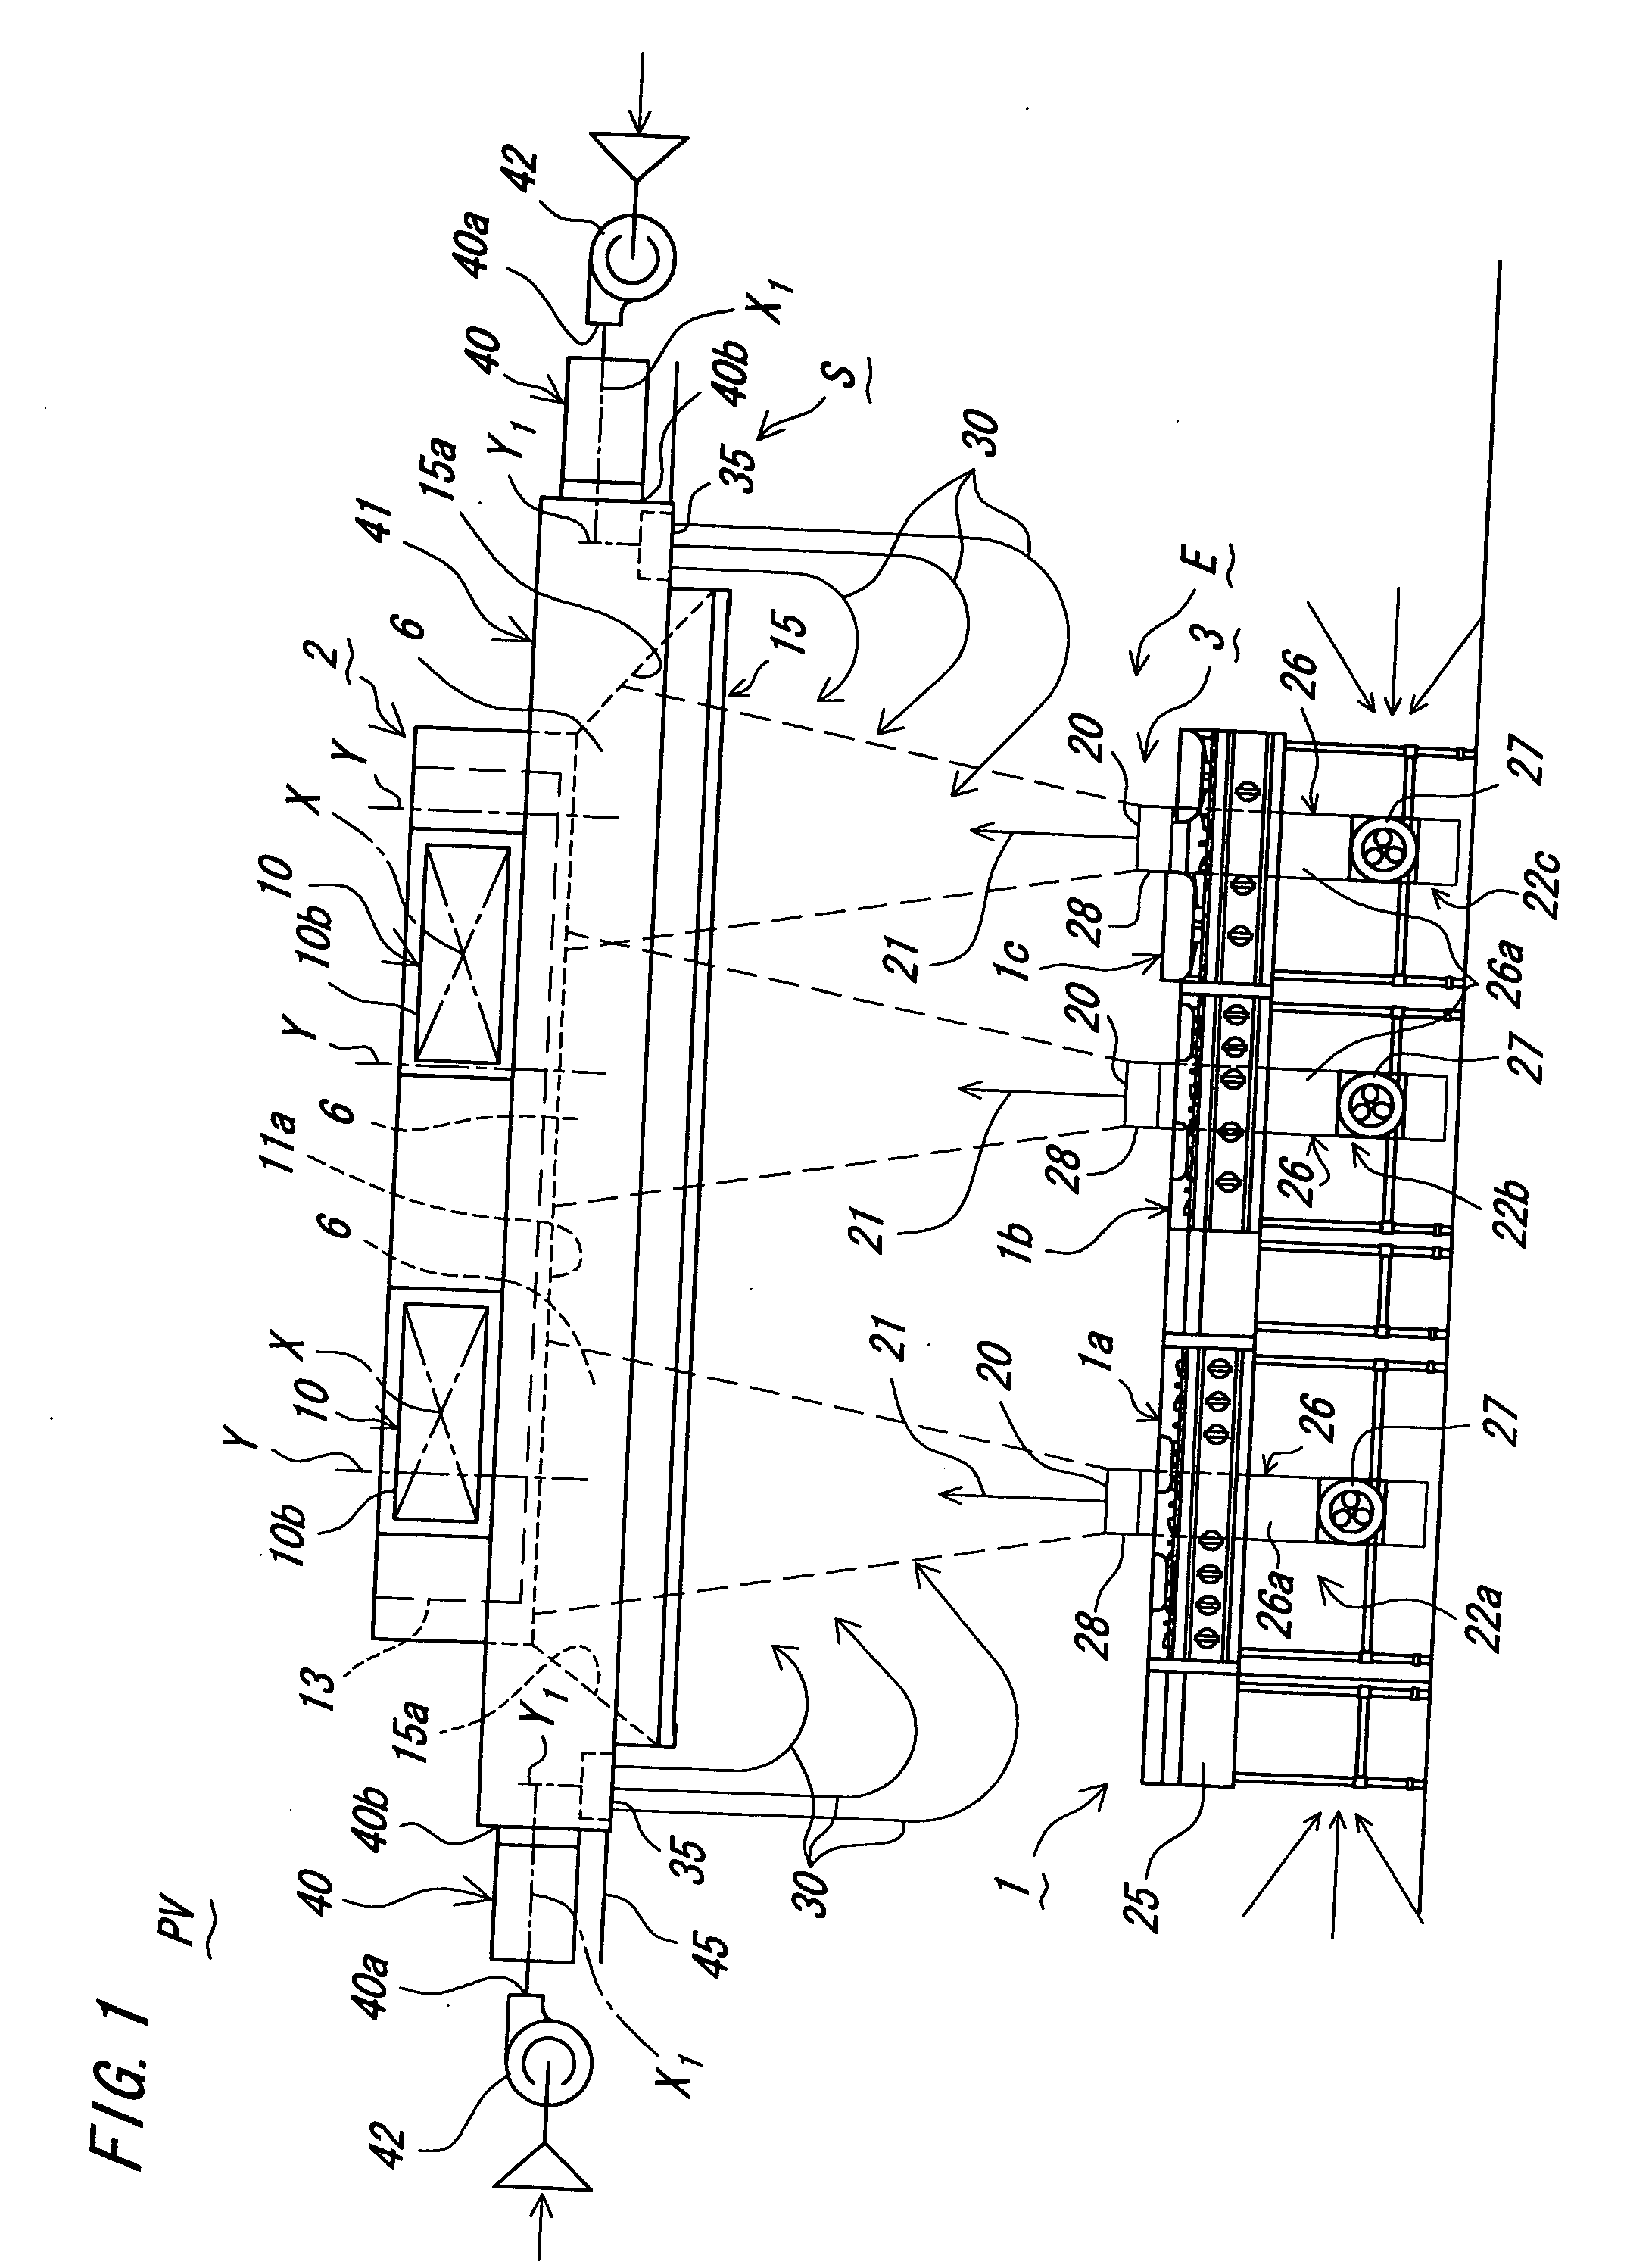 Method and device for local ventilation by buiding airflow and separating airflow